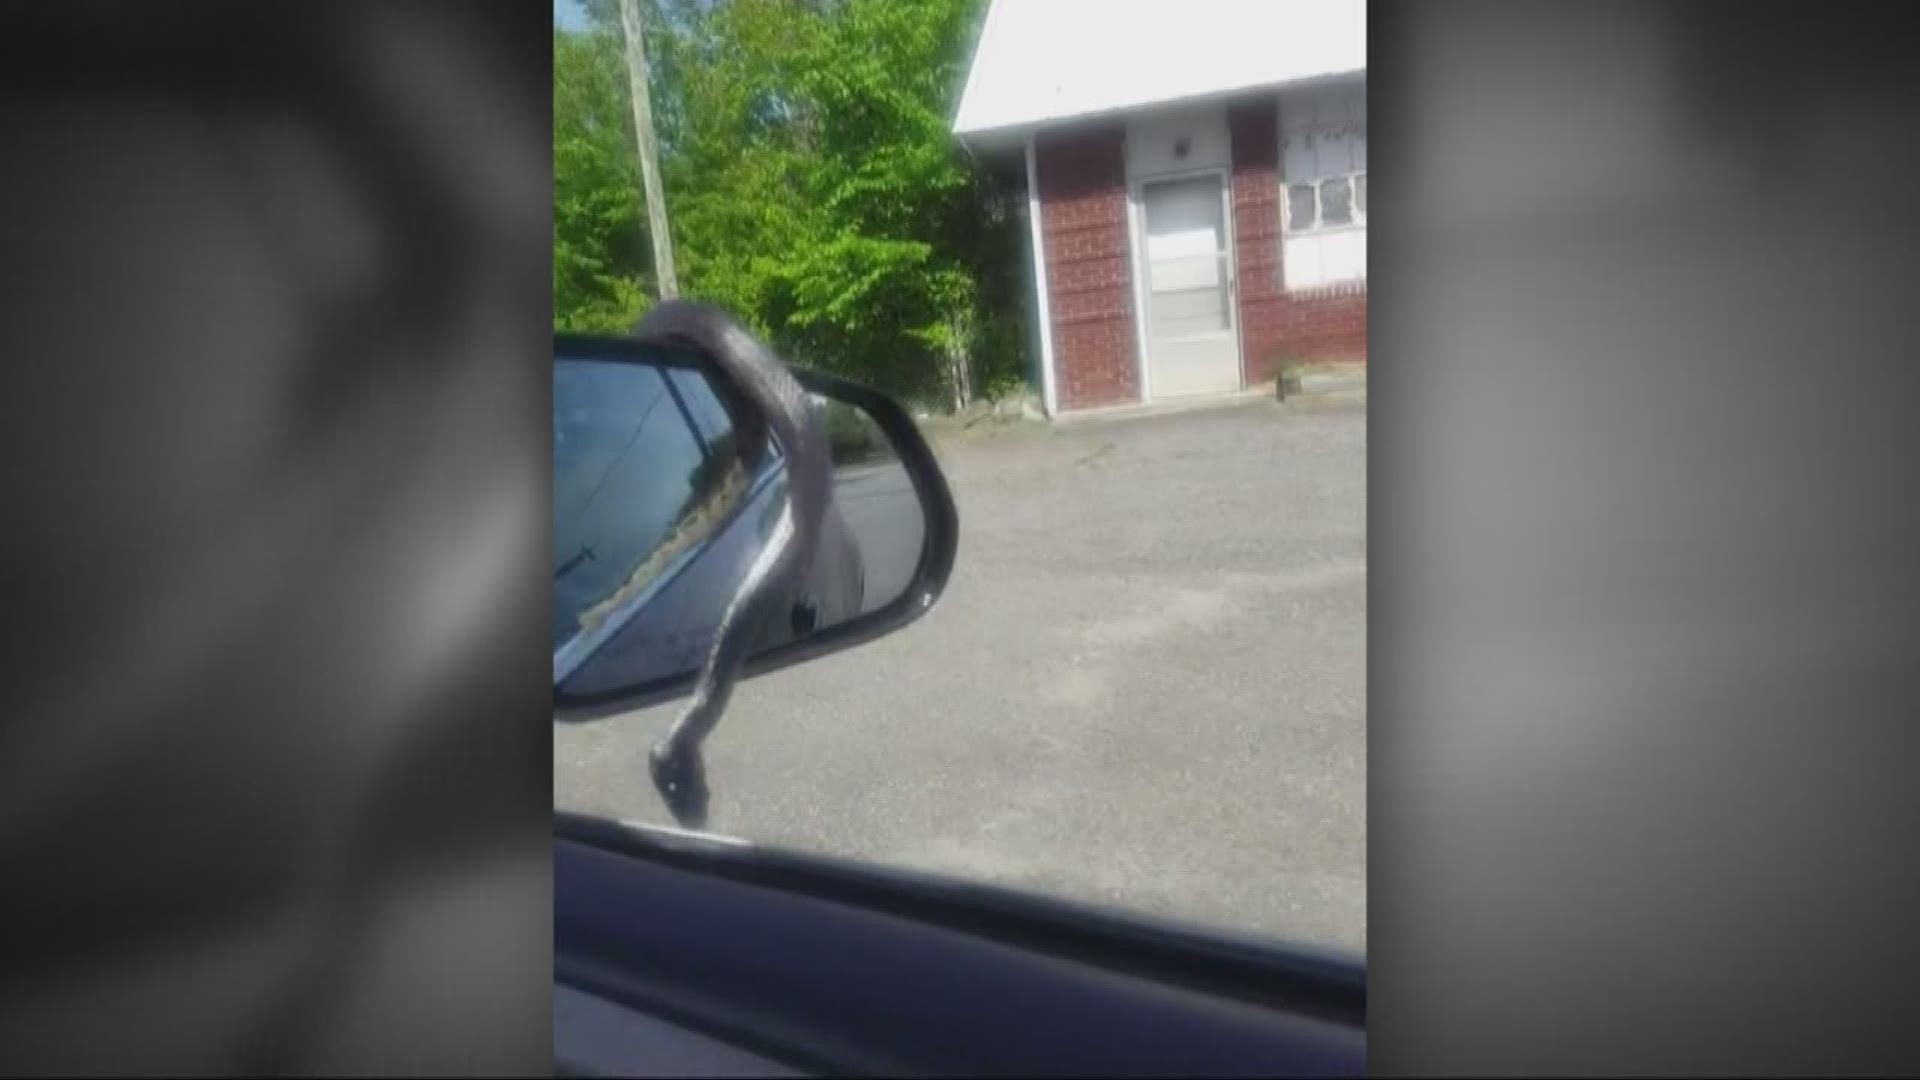 A Gaston County couple driving down the road saw a black snake slithering on the side mirror of their car.